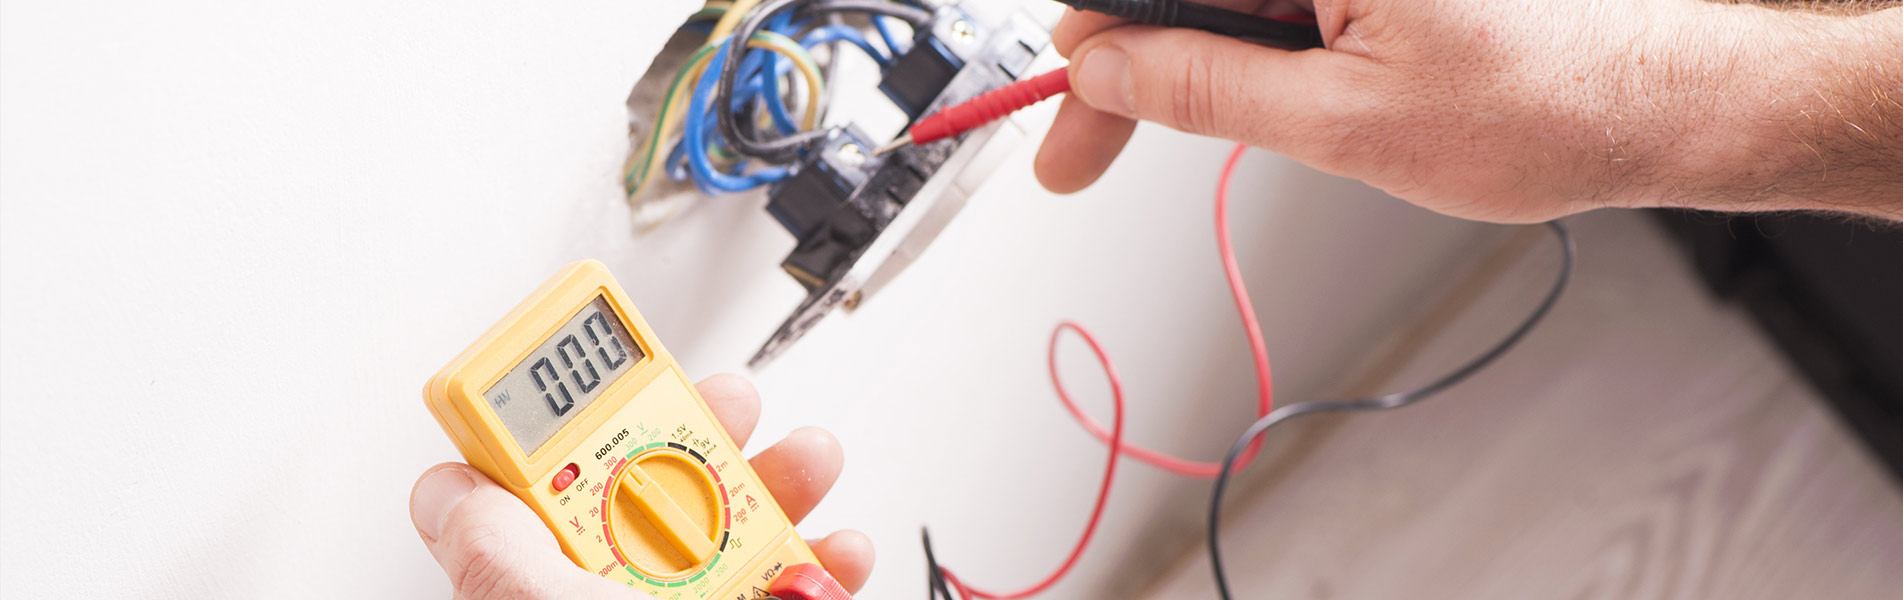 Reliable Electrician SG - Electrical Repair Service Singapore